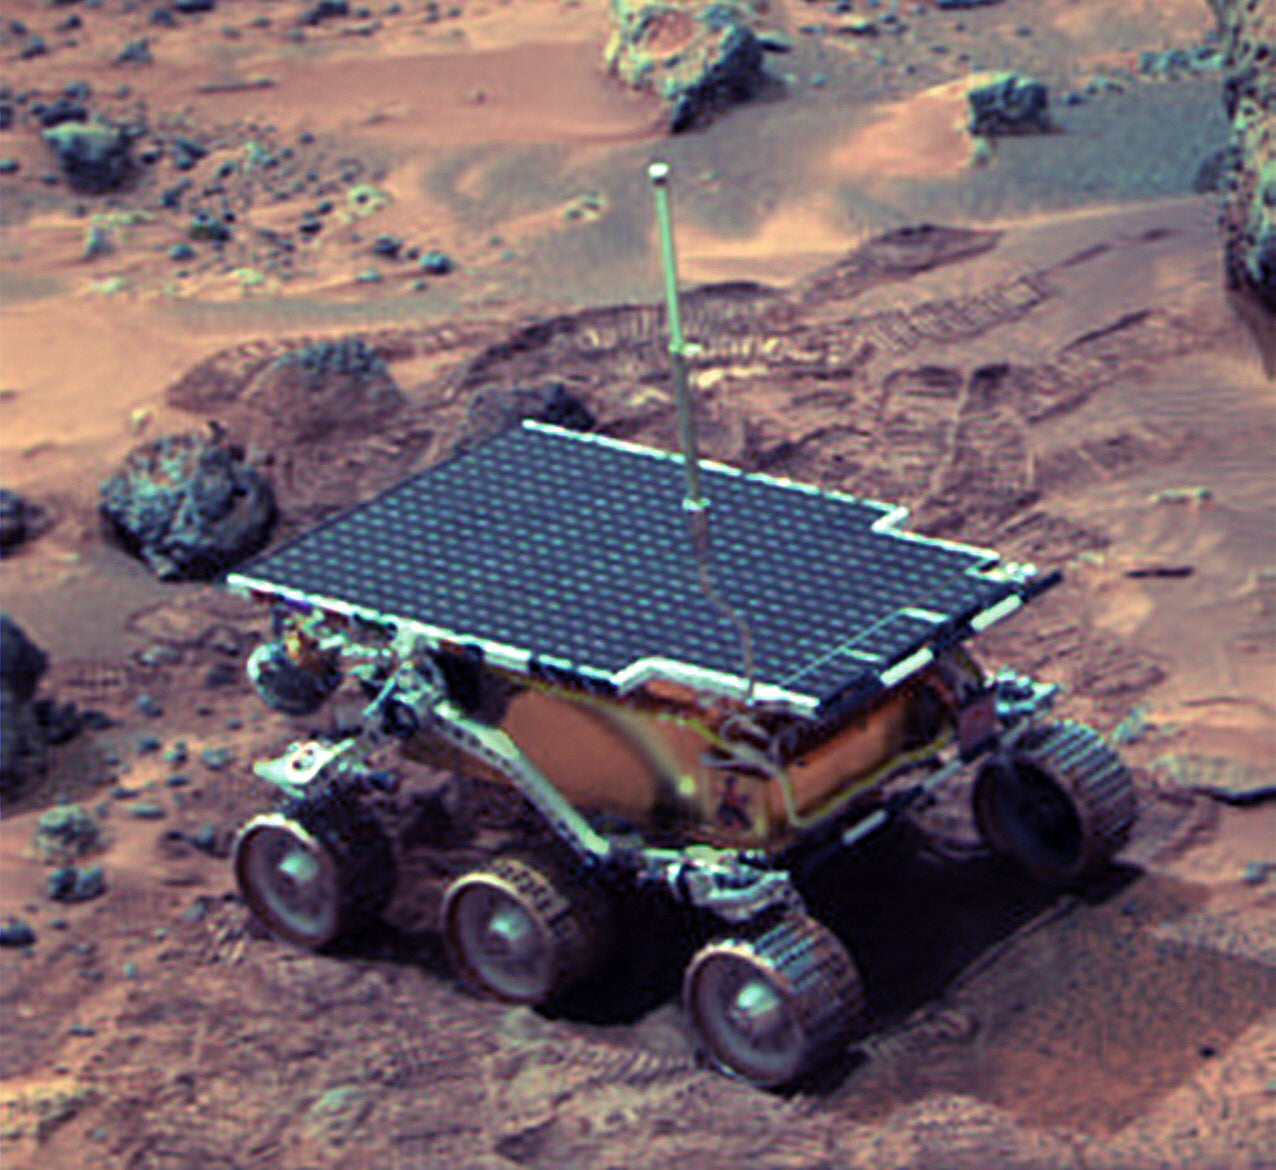 The Sojourner rover working on Mars.  (Image: NASA)